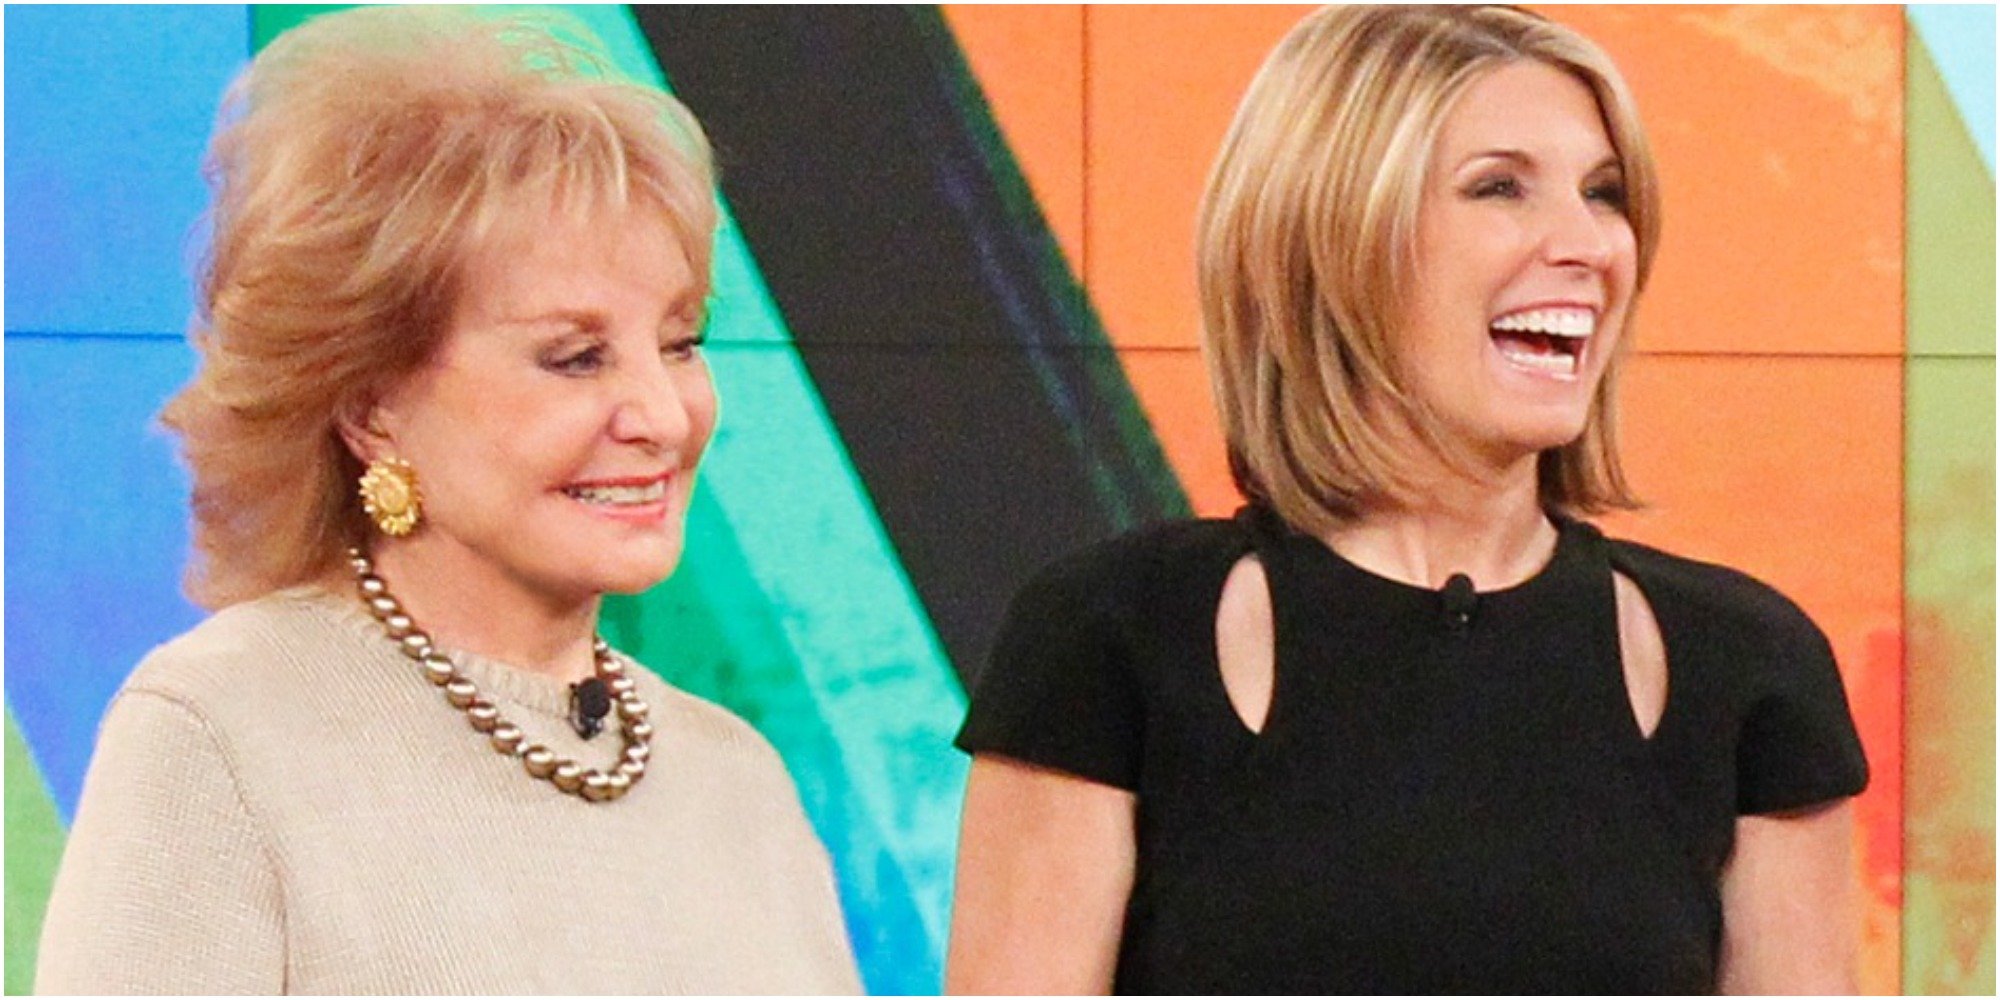 Barbara Walters and Nicolle Wallace laugh on the set of "The View."